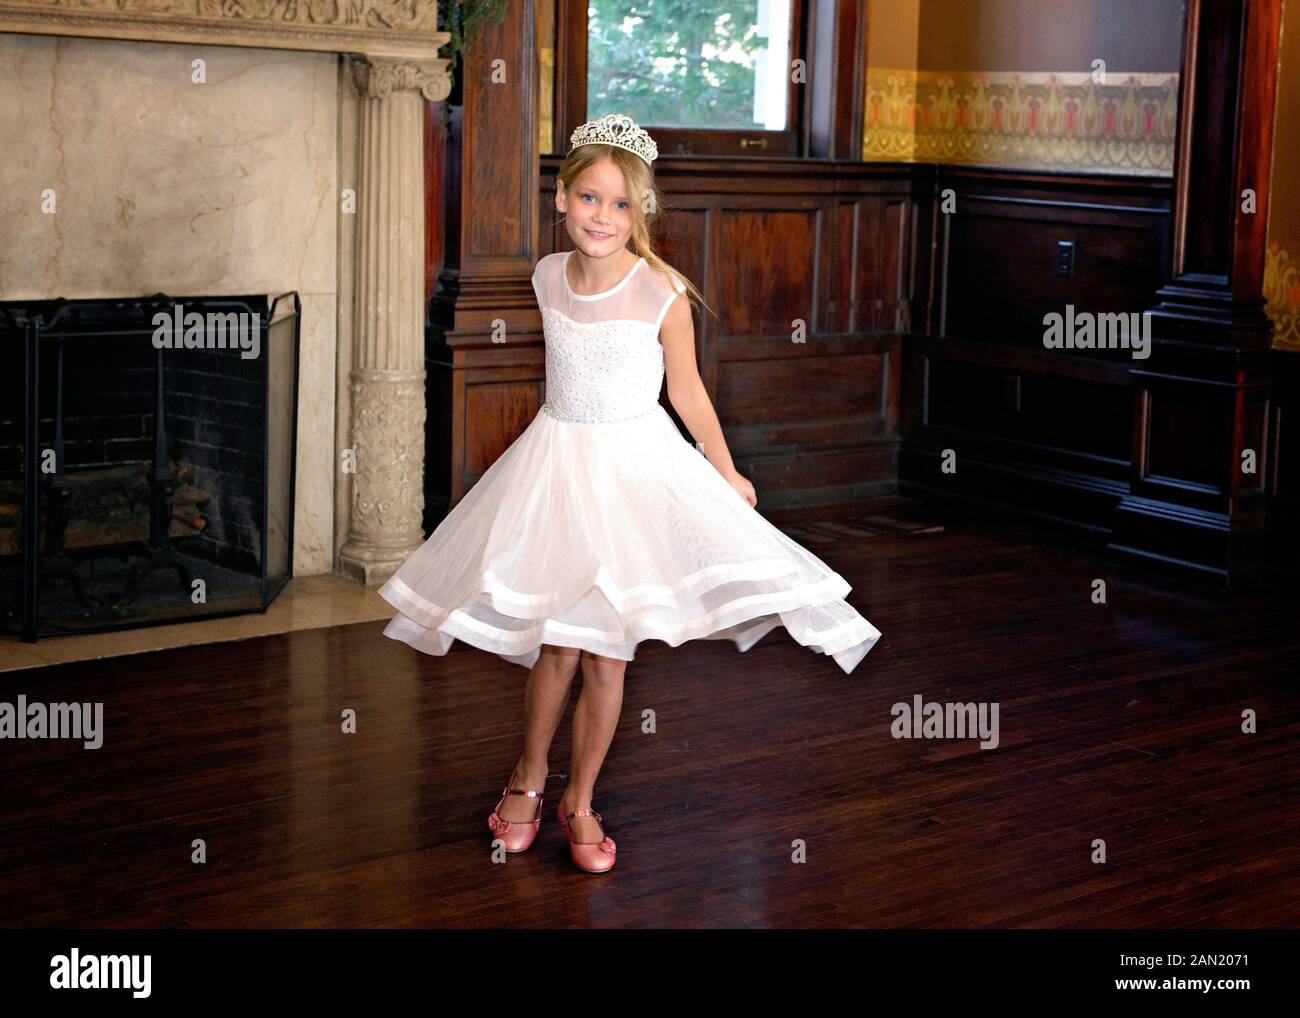 6. Little girl with blond hair and a pink dress twirling - wide 6